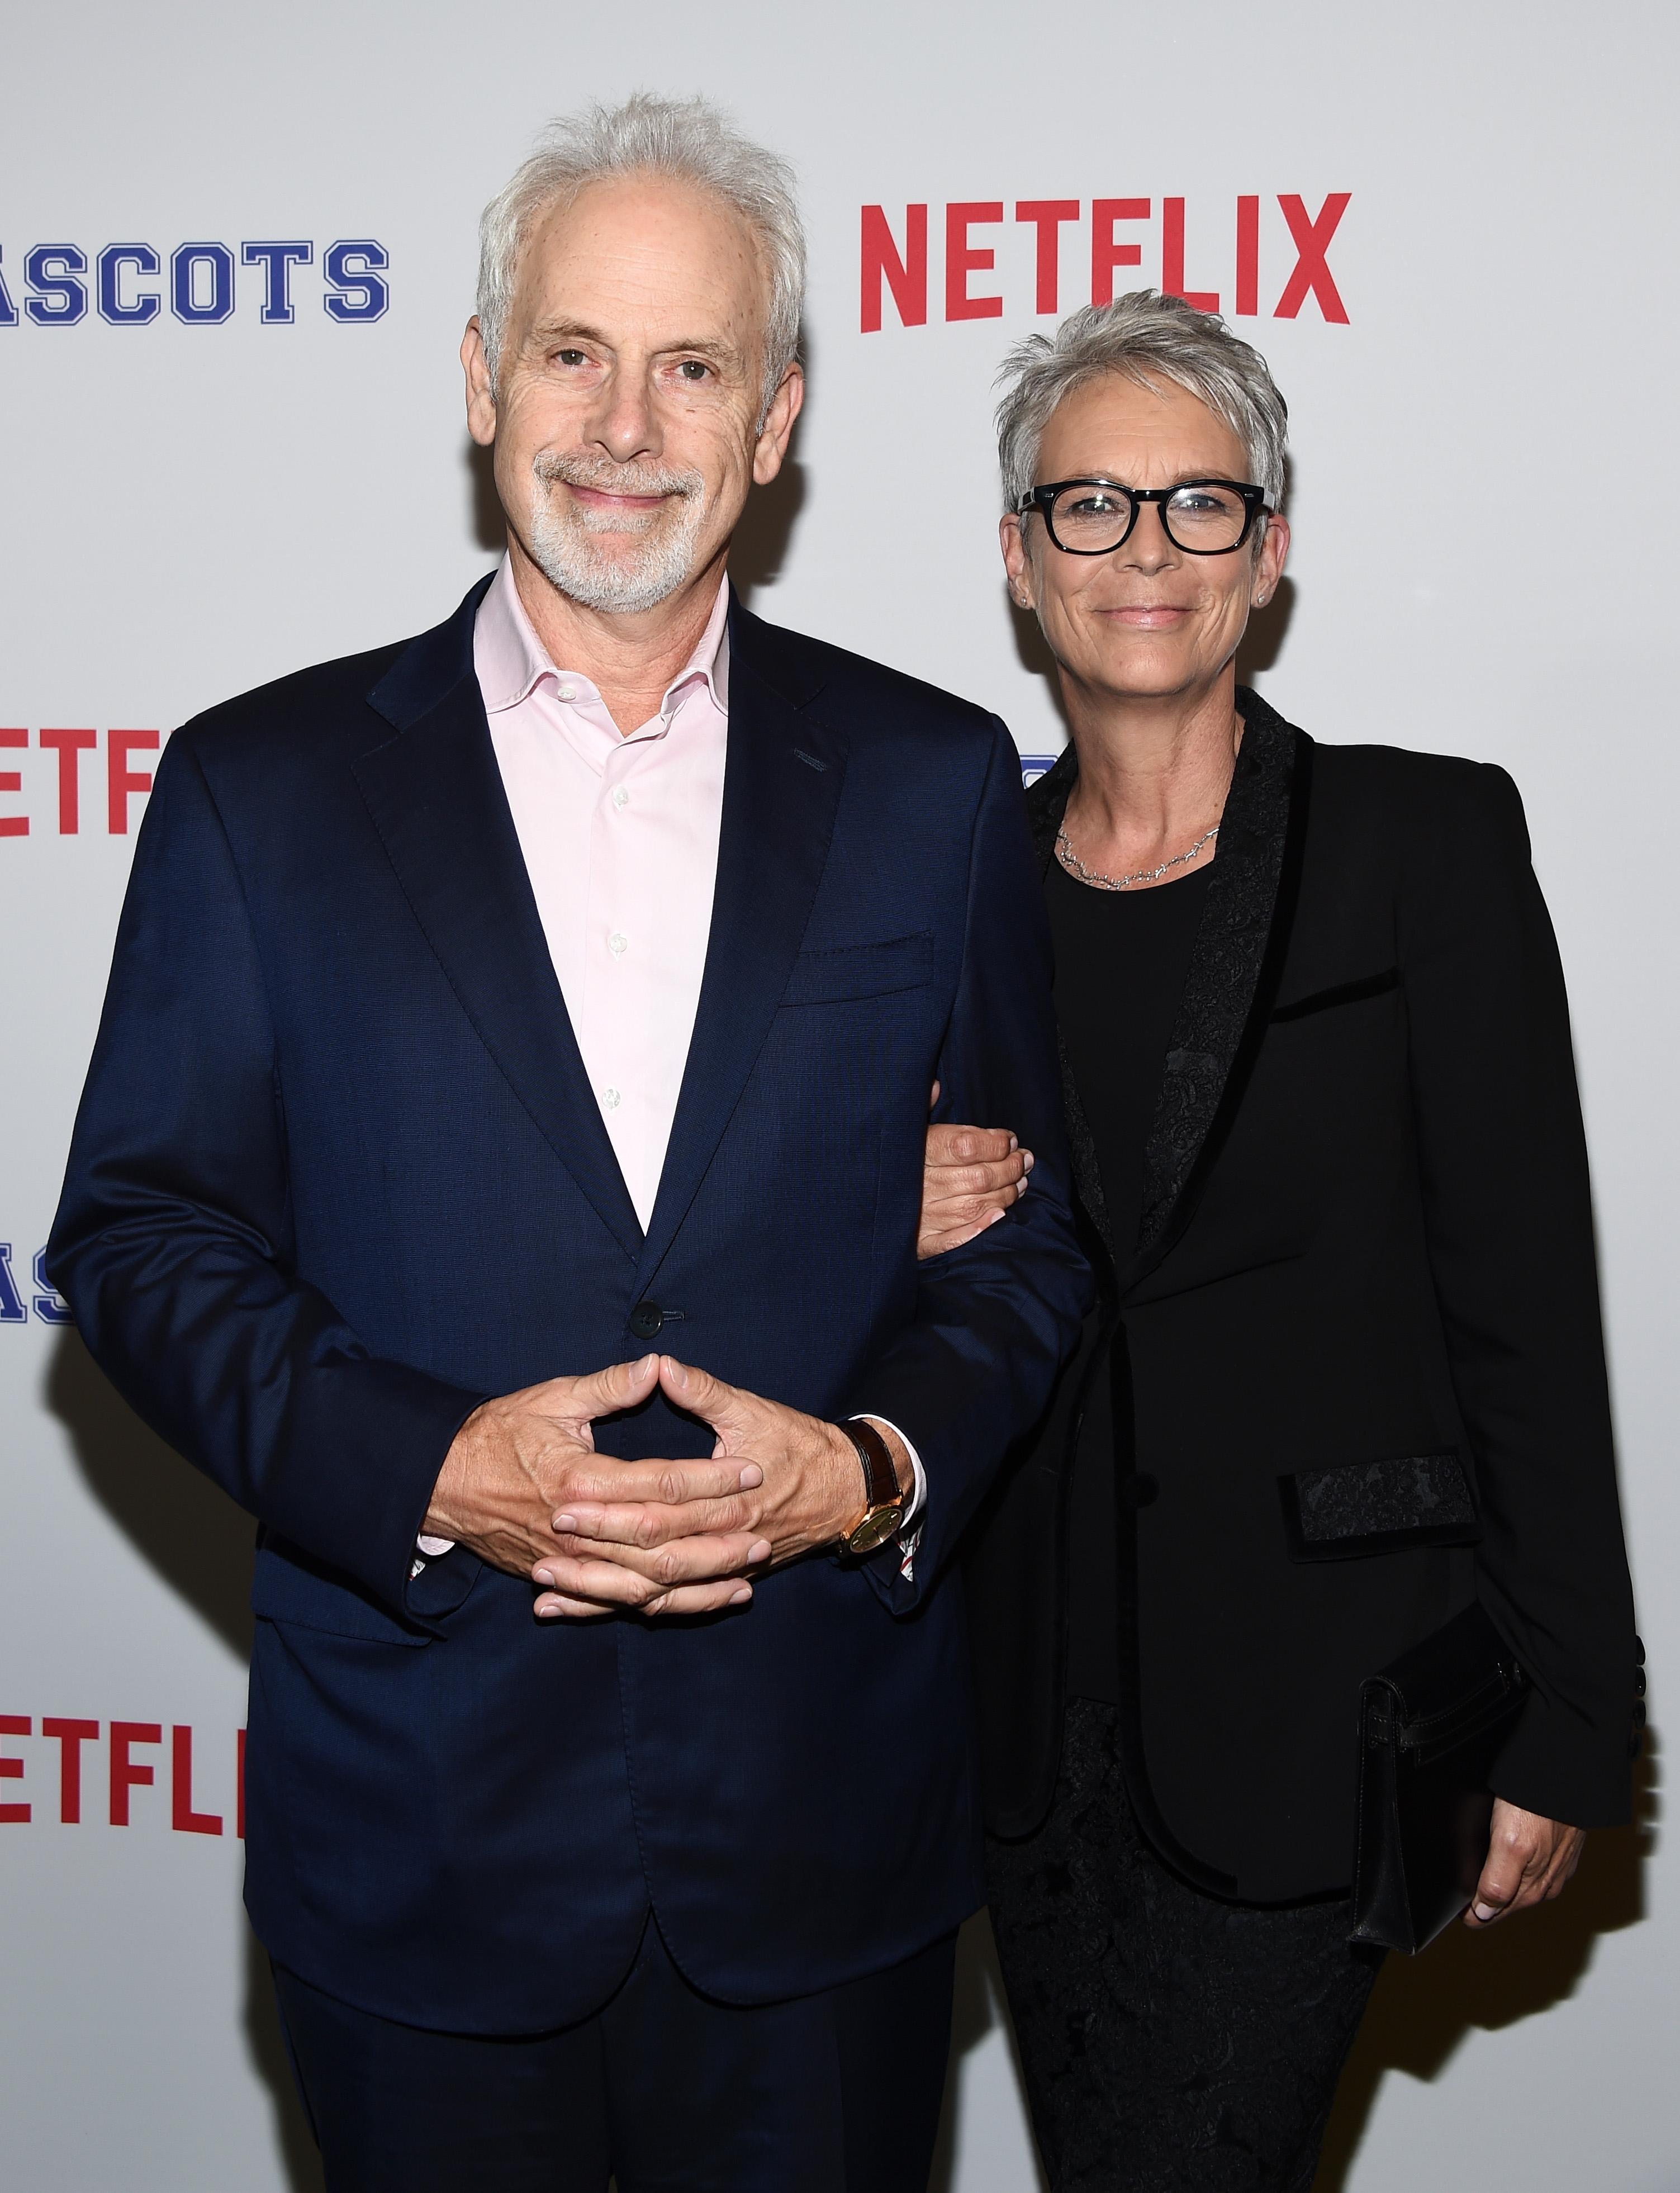 Christopher Guest and Jamie Lee Curtis arrive at a screening of Netflix's "Mascots" at the Linwood Dunn Theater in Los Angeles, California on October 5, 2016. | Source: Getty Images